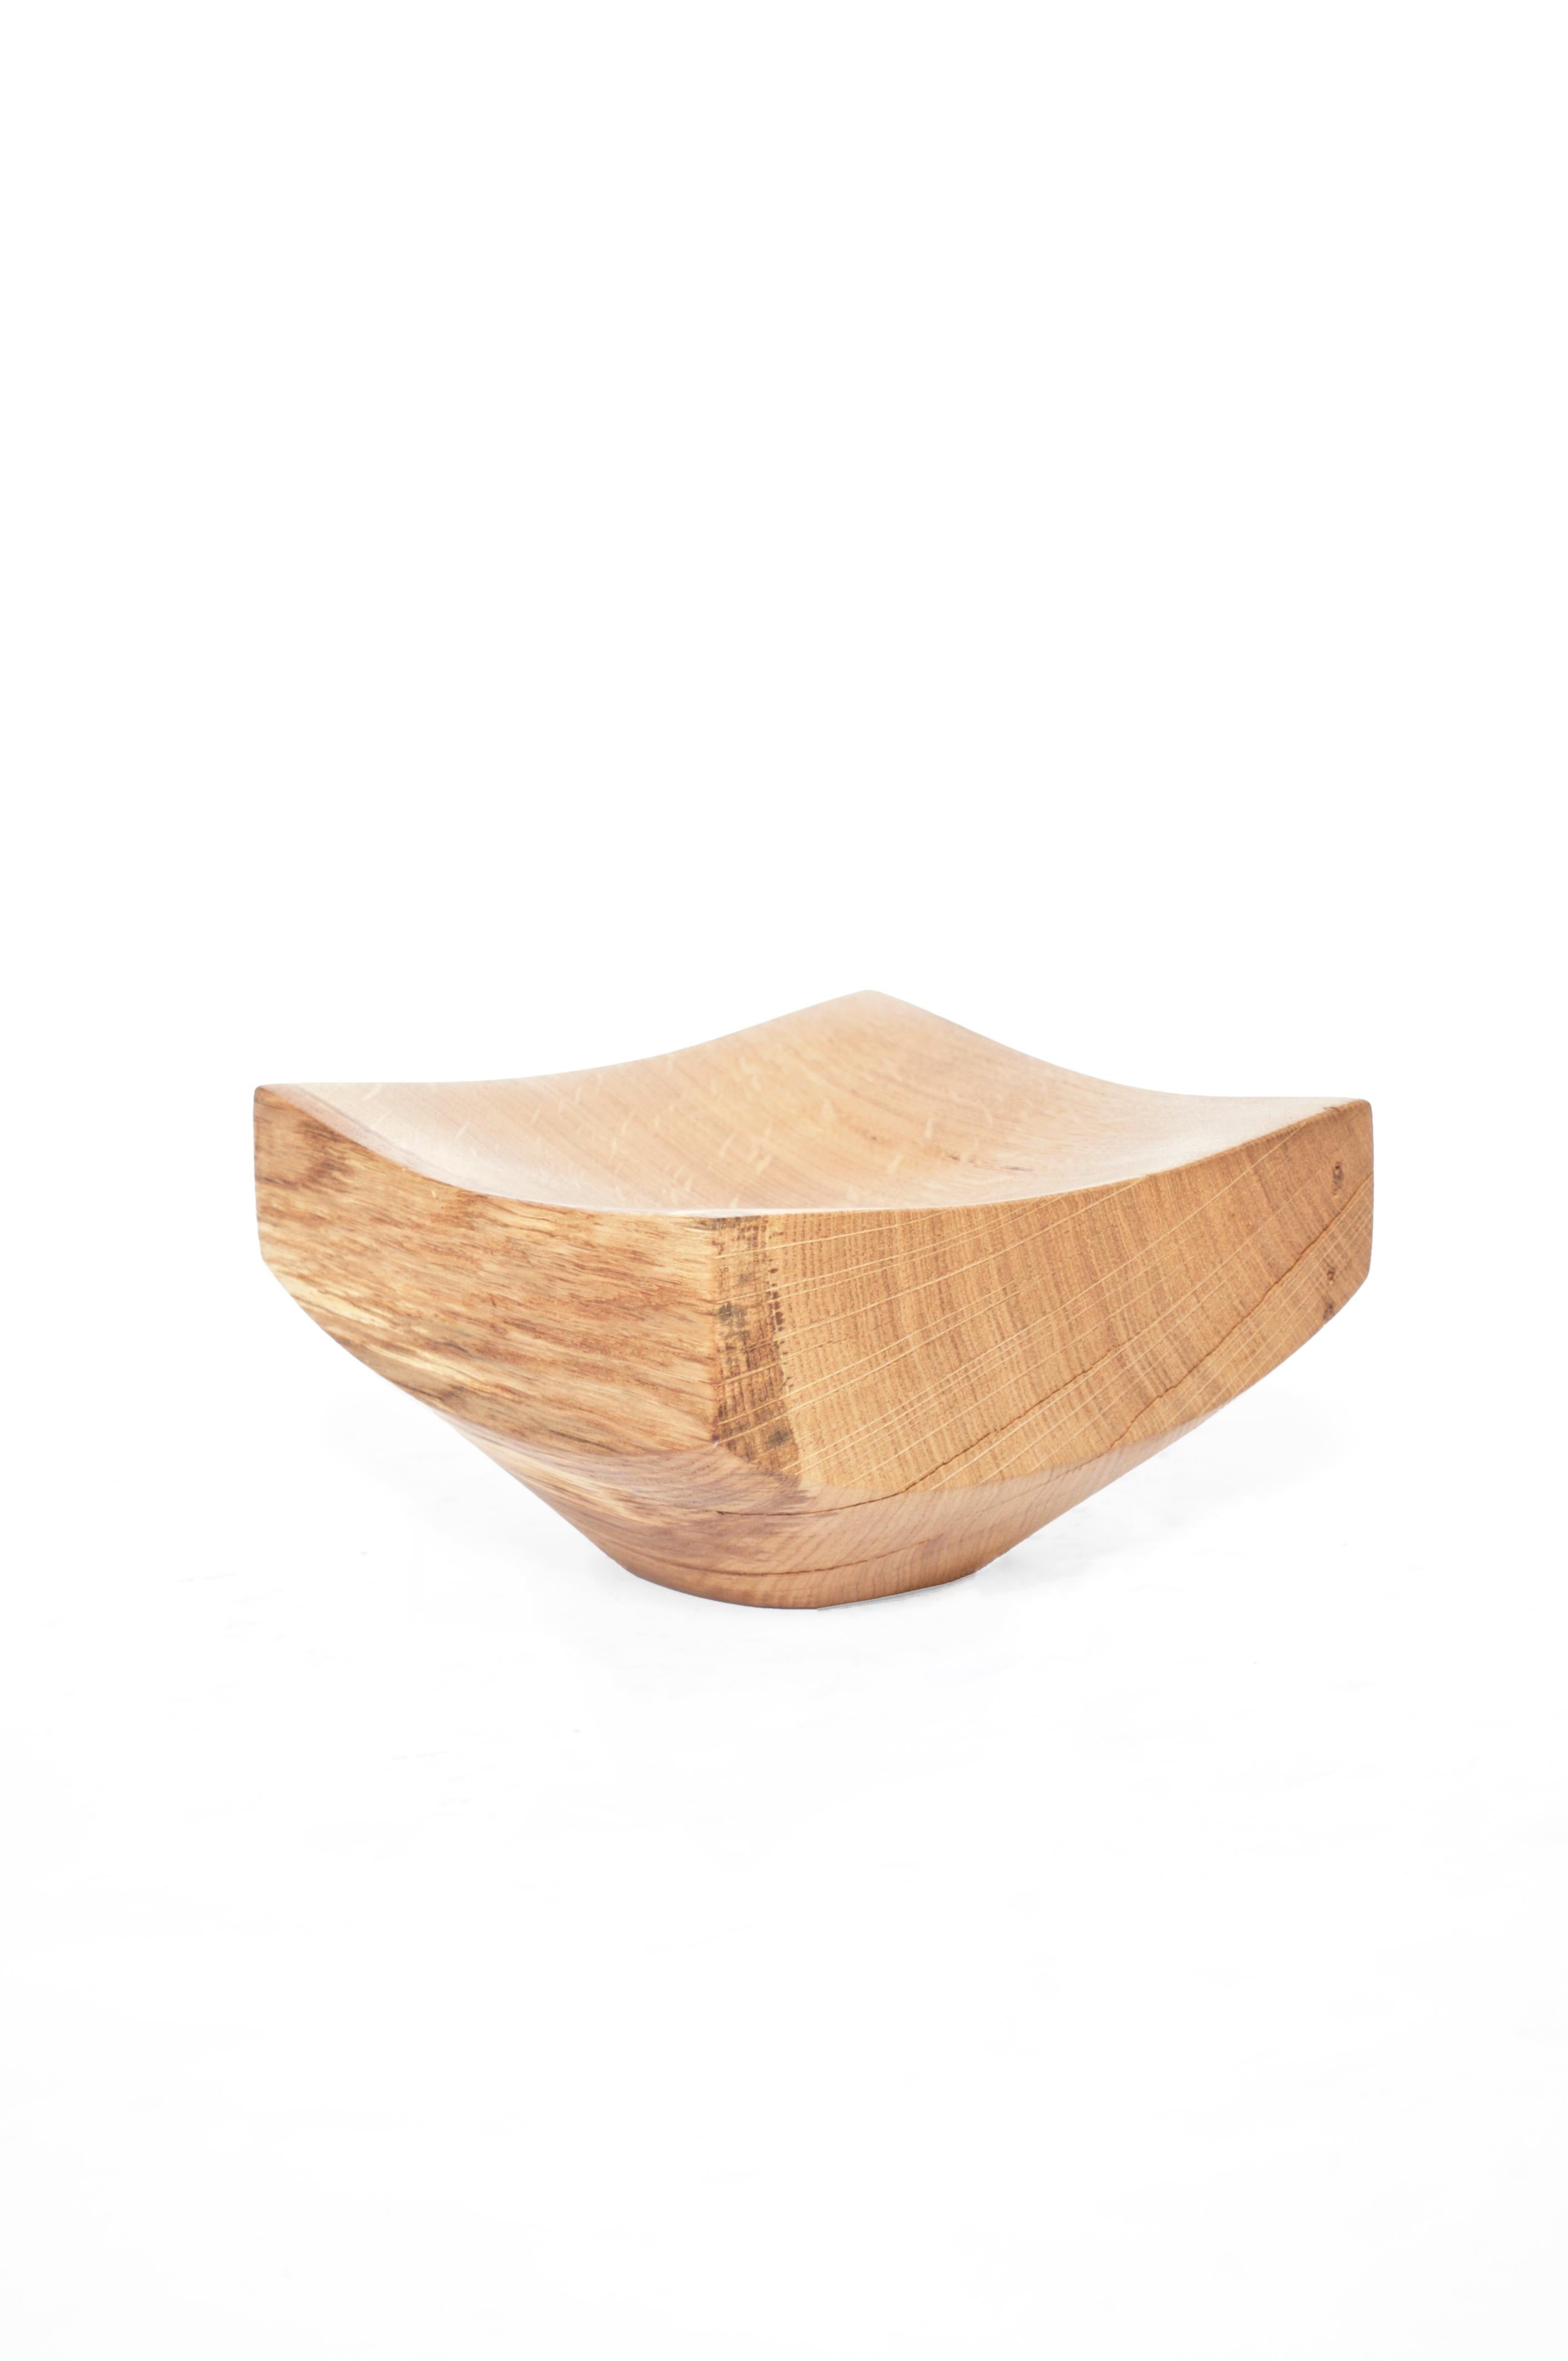 Large vessel 2801 by Jörg Pietschmann
Dimensions: D 18 x W 20 x H 11 cm 
Materials: oak. 
Finish: polished oil finish.
Also available in small. 


In Pietschmann’s sculptures, trees that for centuries were part of a landscape and founded in